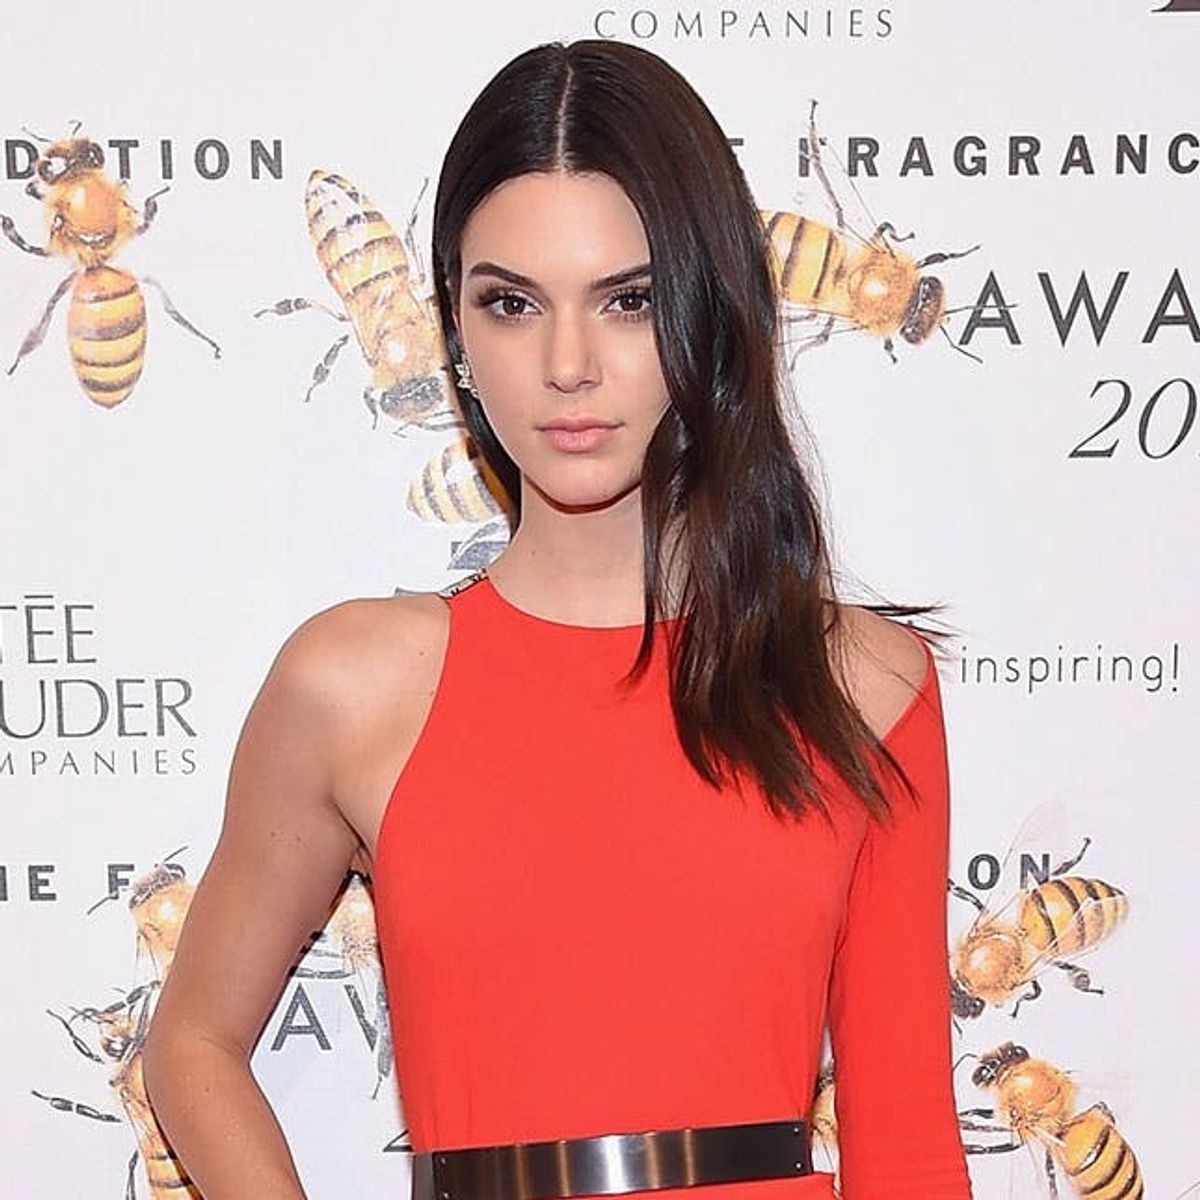 Why Kendall Jenner Will Make You Want to Try the One-Shoulder Dress Trend